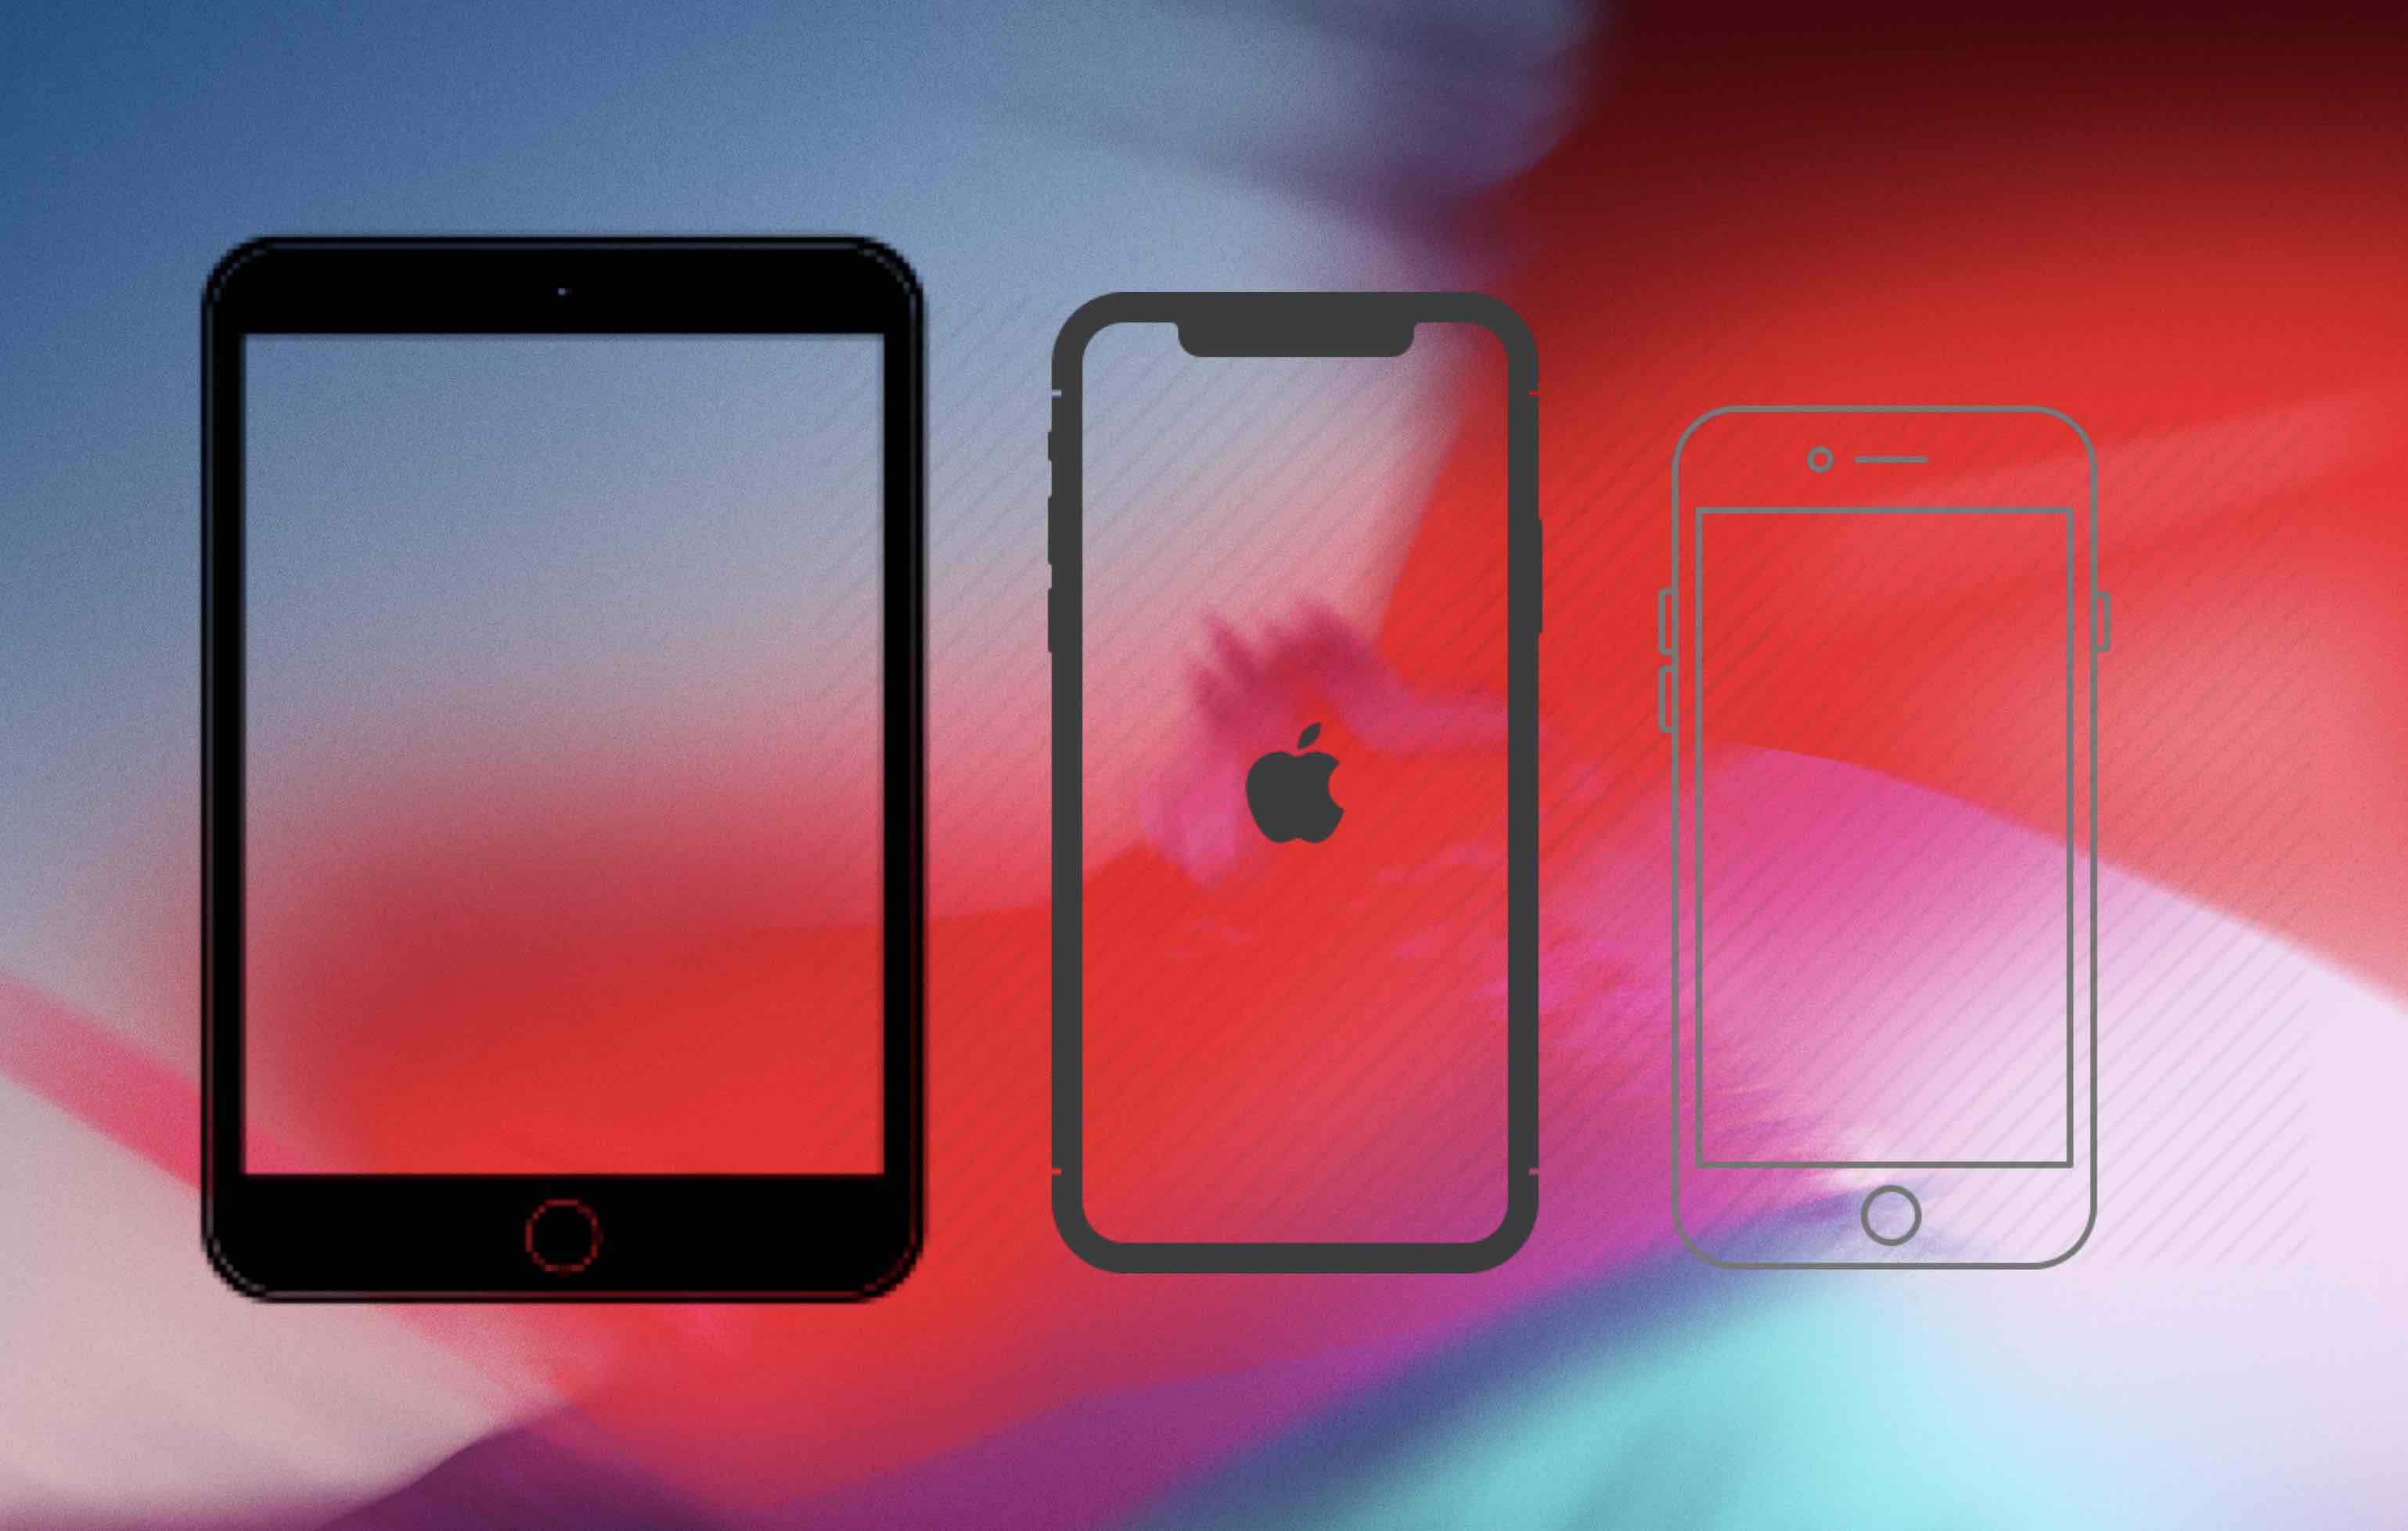 iOS 12 Wallpapers in HD for iPhone and iPad - Beta Official